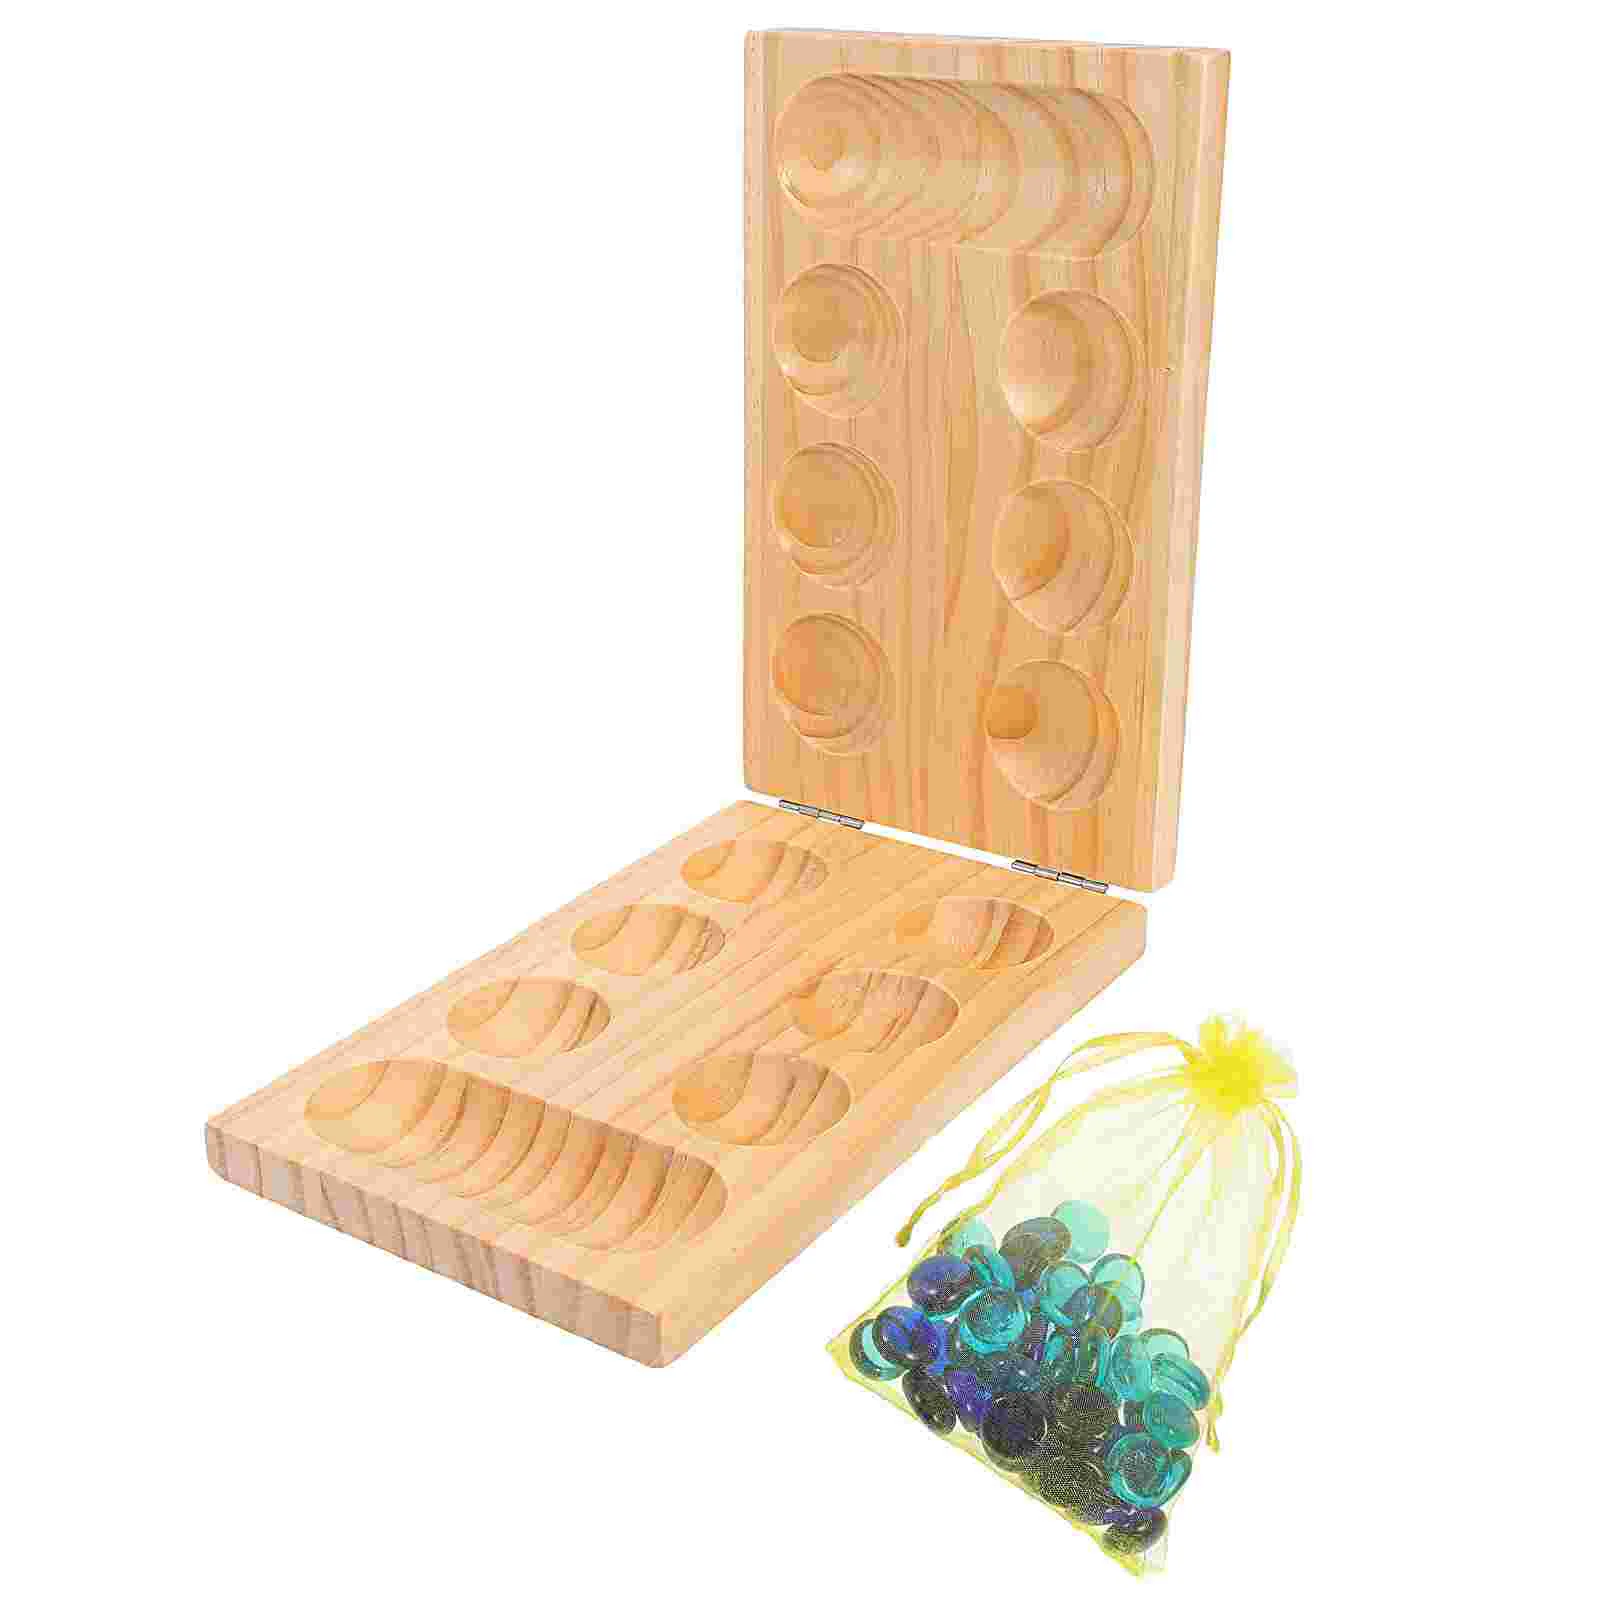 kids Mancala Toy Wooden Game Gemstone Chess Toy Fold Board Training Portable Mancale foldable cabinet ironing board wall mounted ironing board hanging mirror door fold up and down built in